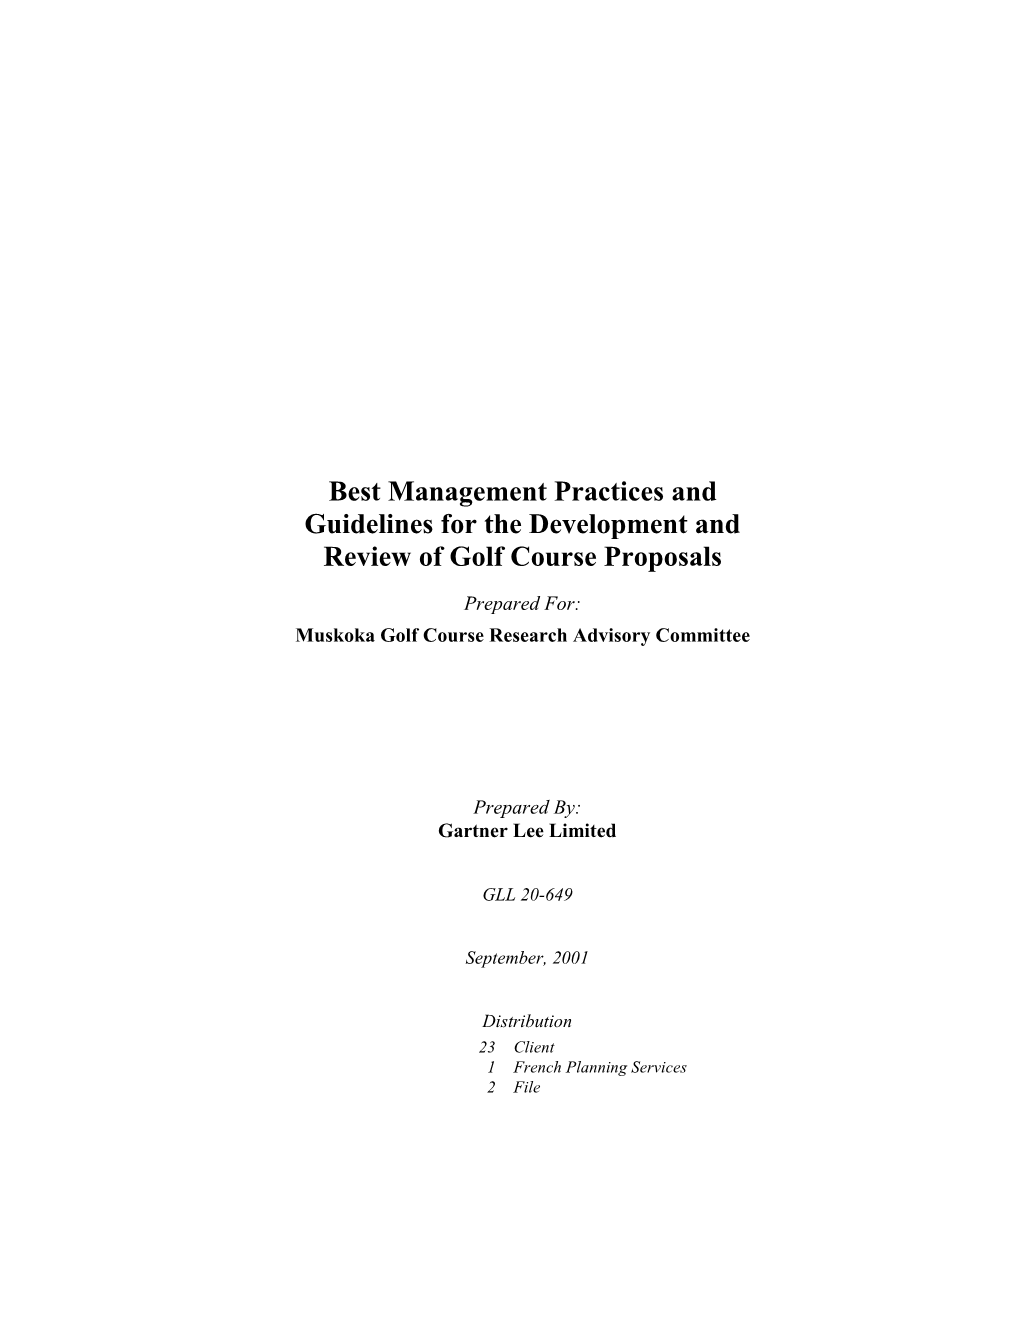 Best Management Practices and Guidelines for the Development and Review of Golf Course Proposals